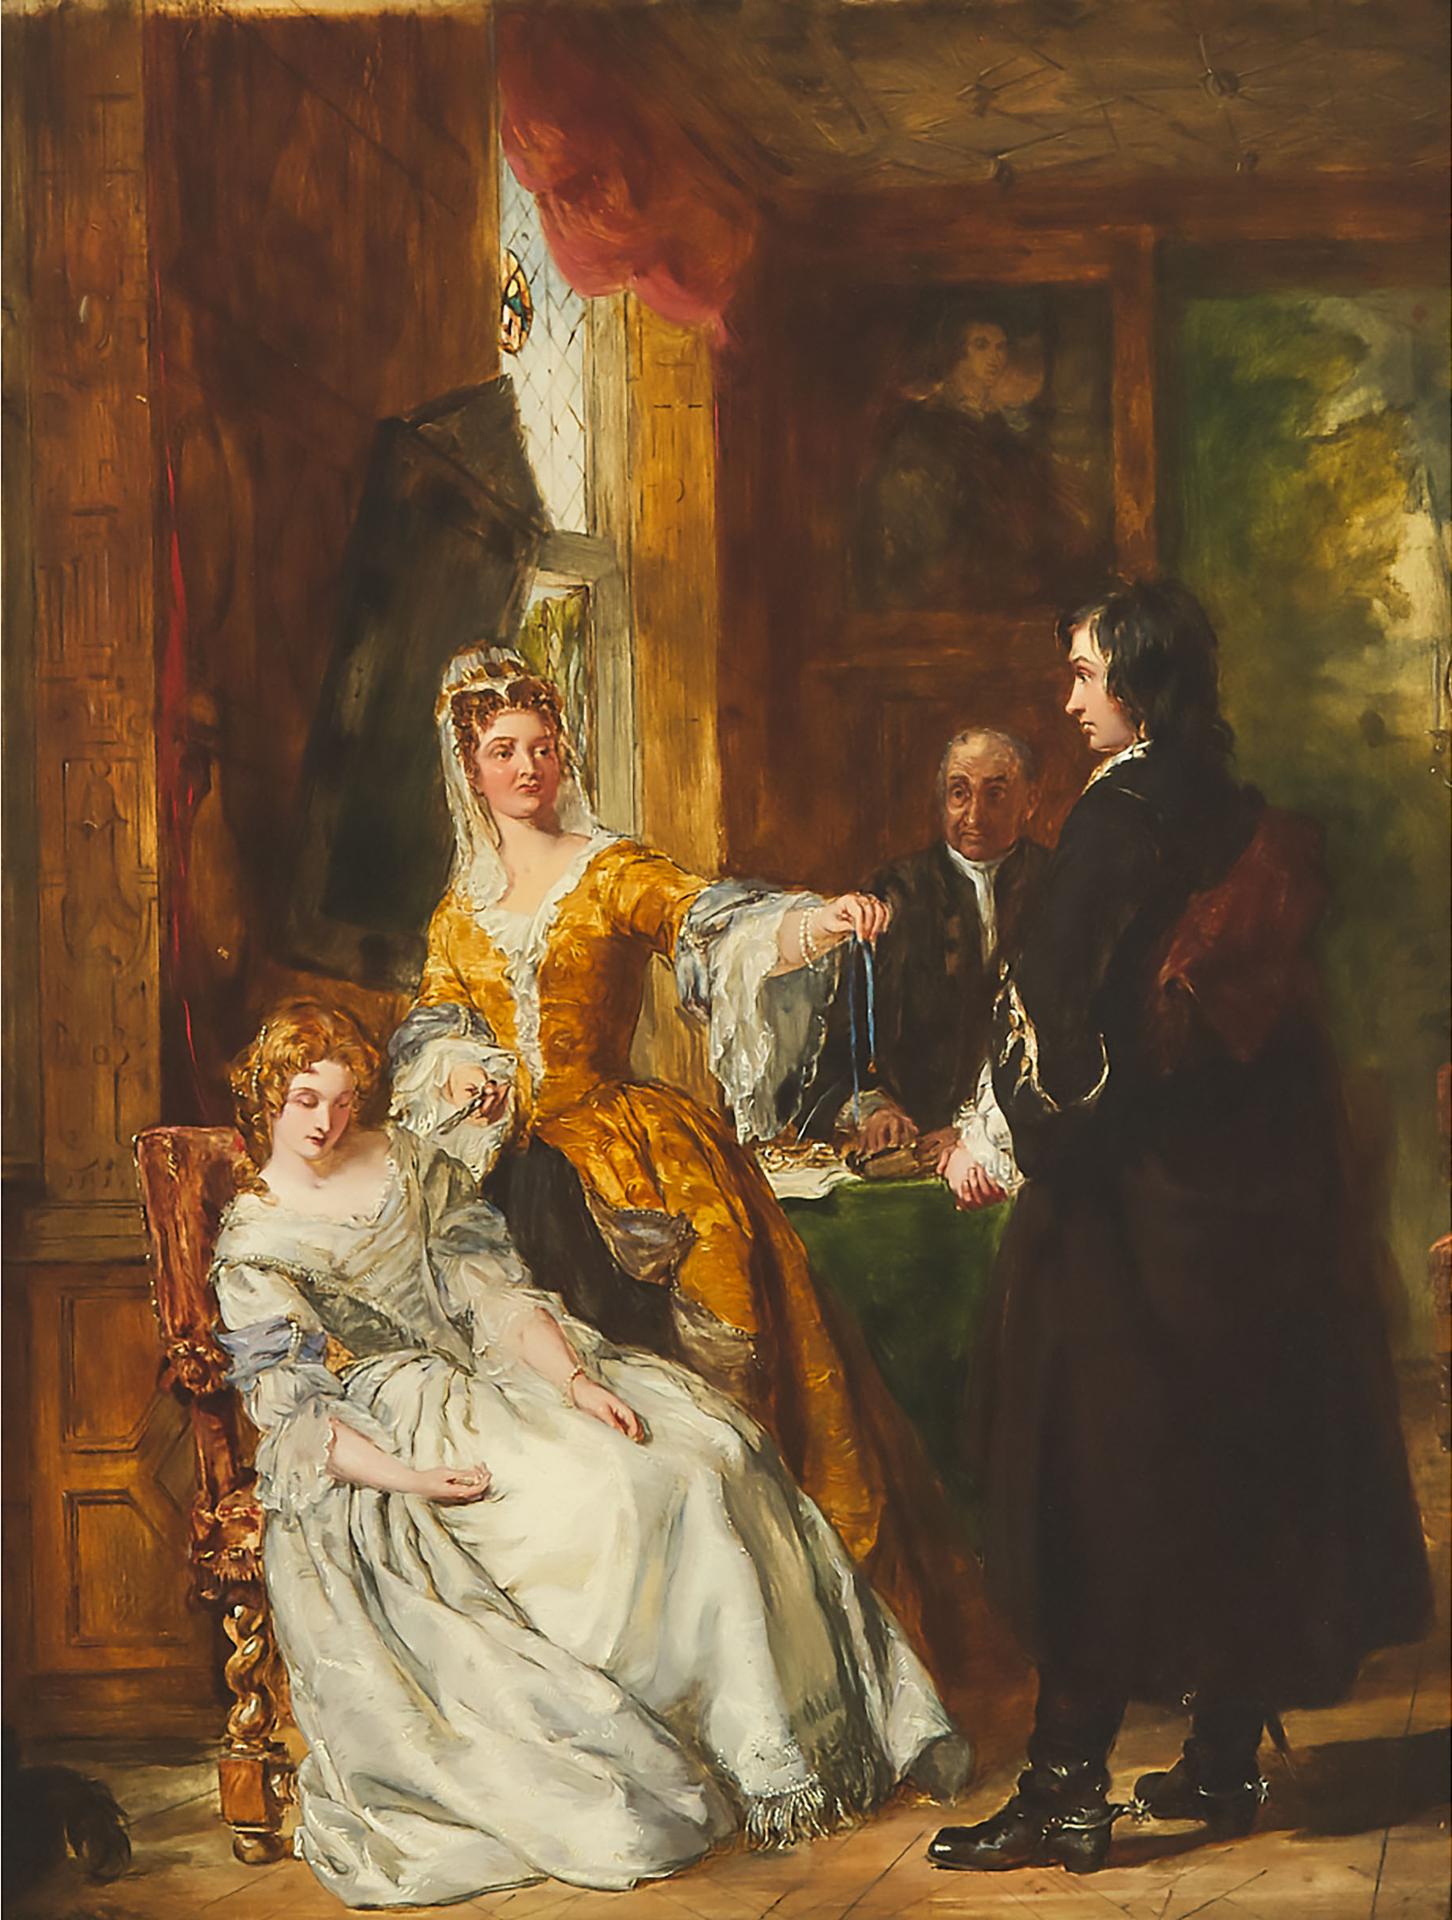 William Powell Frith - The Love Token